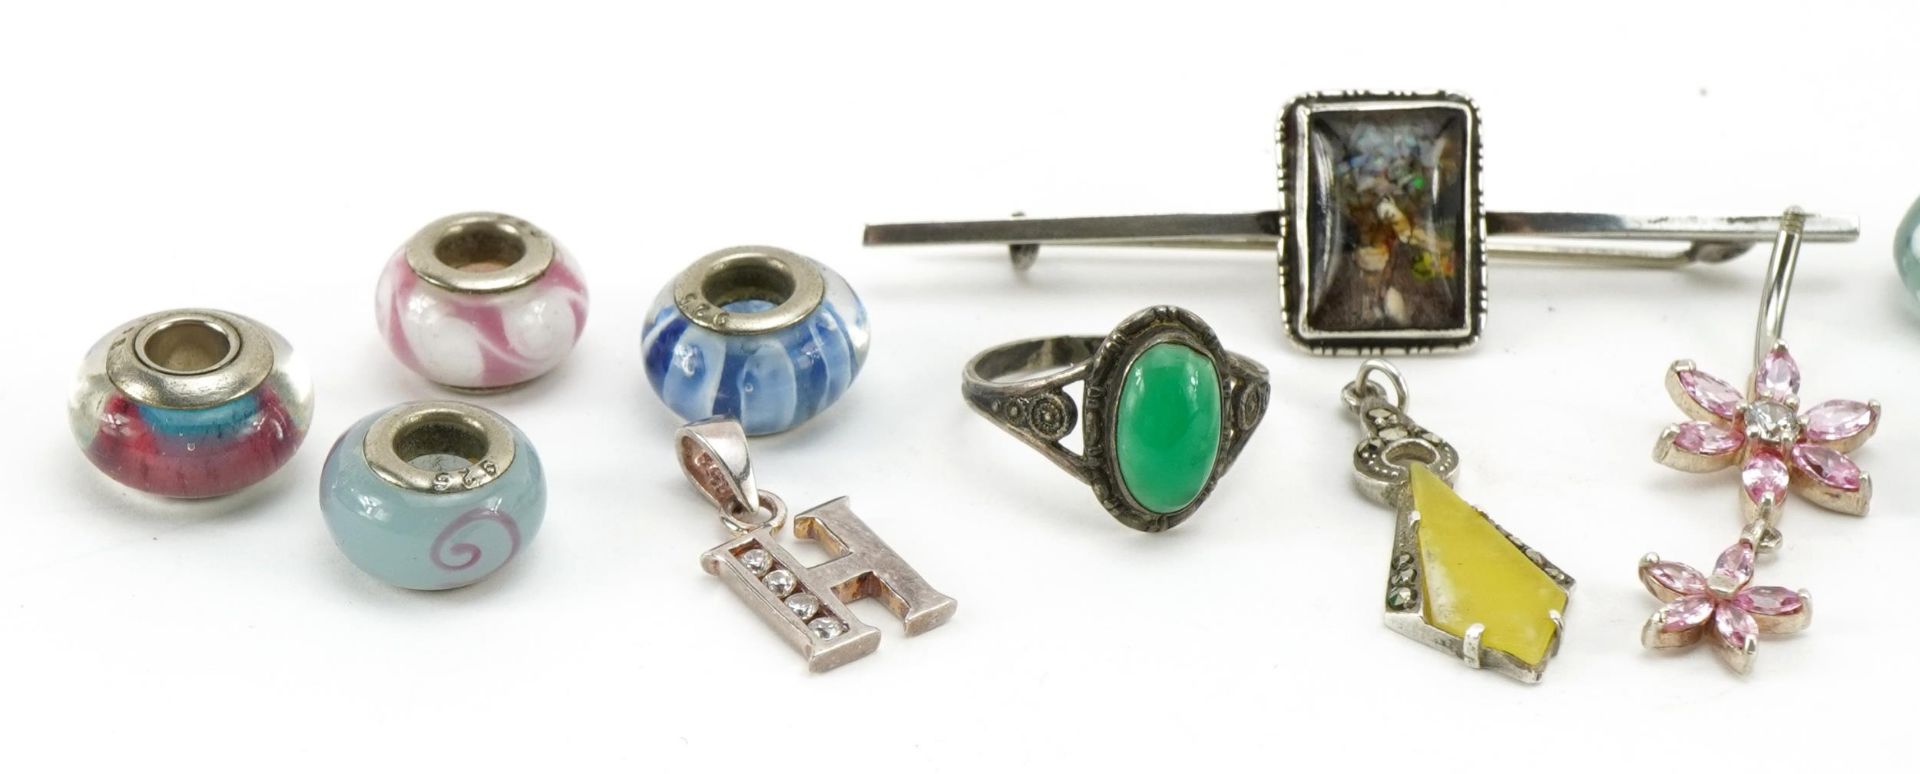 Silver jewellery including cabochon green stone ring, beads and bar brooch, total 29.8g - Image 3 of 3